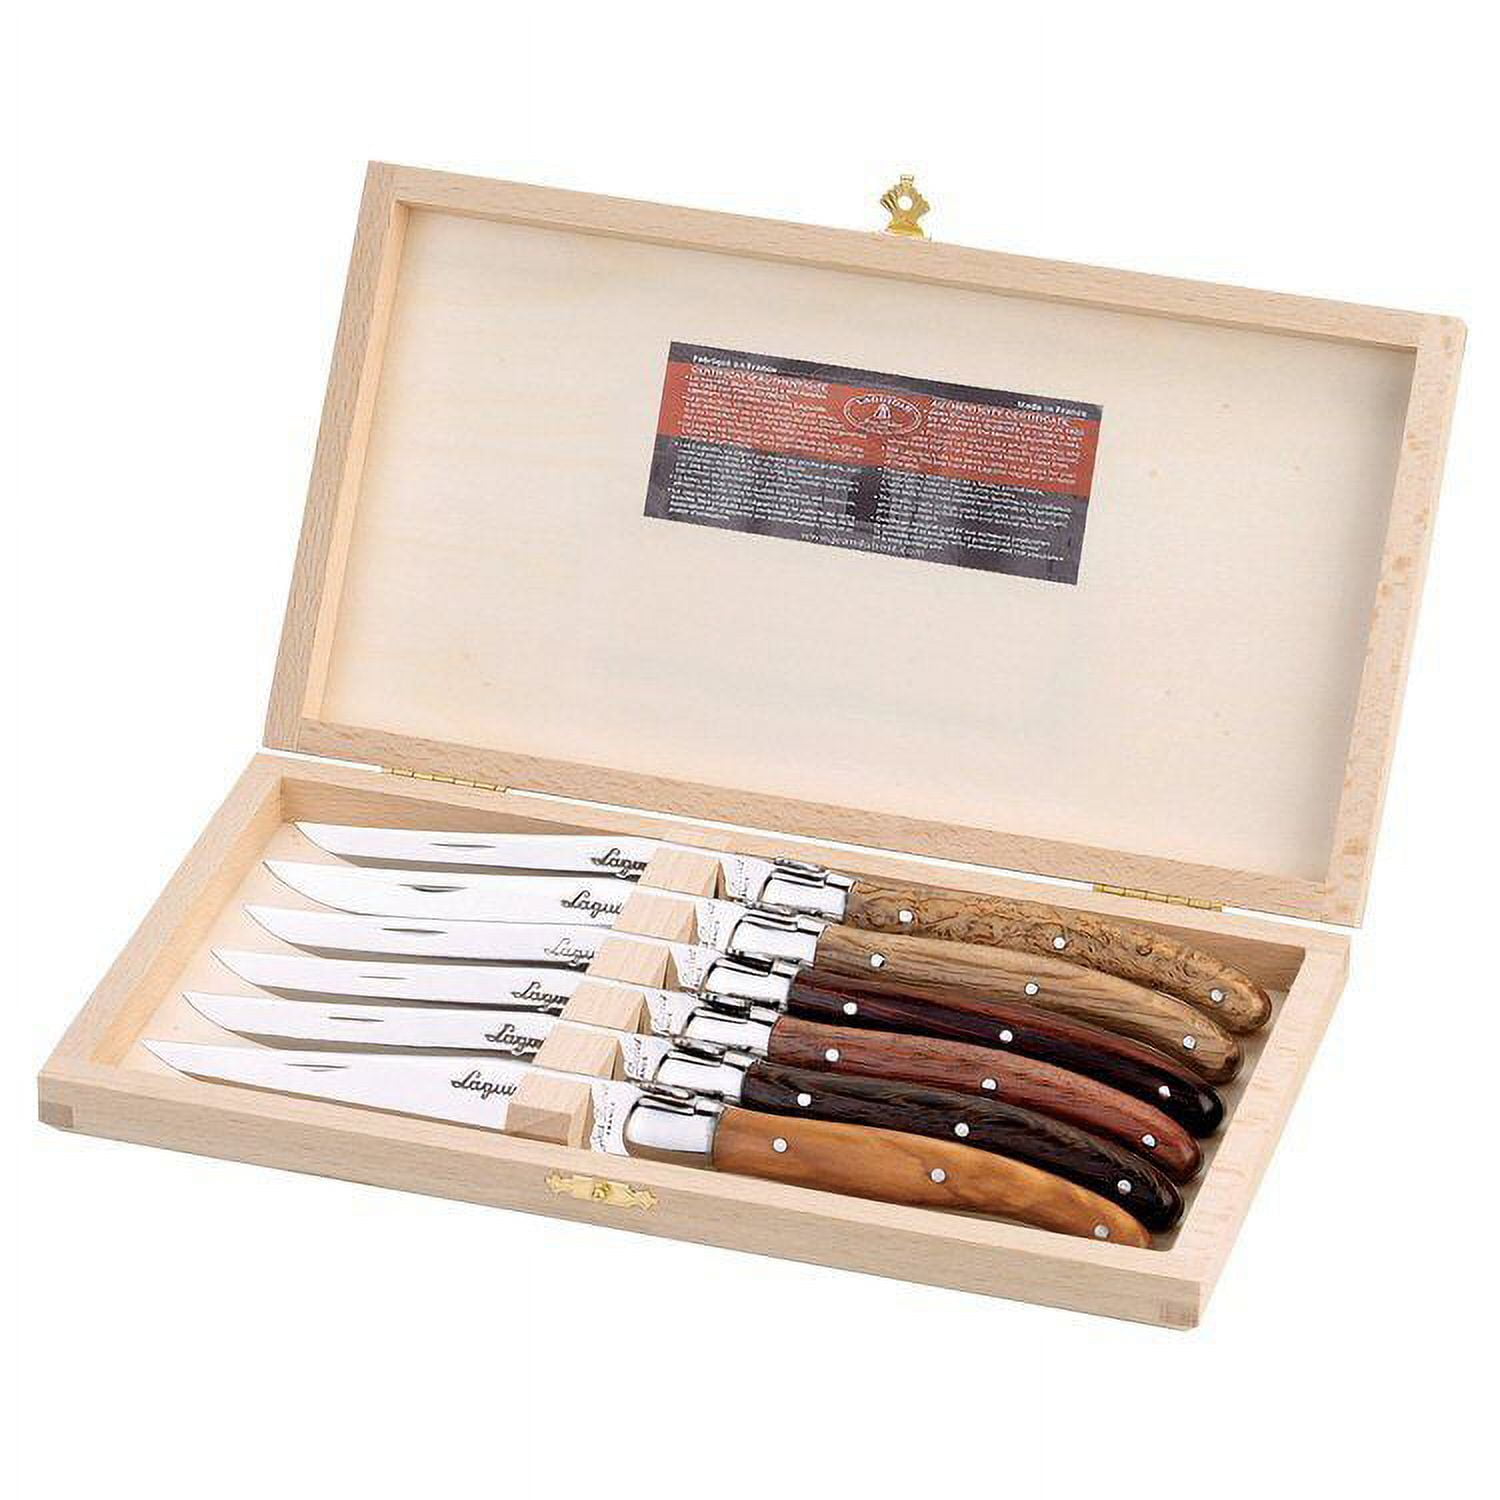 Jaswehome 6-Piece Serrated Steak Knives Set Dinner Knife Cutlery Solid Wood  Handle Full Tang Steel Laguiole Table Knife Sharp